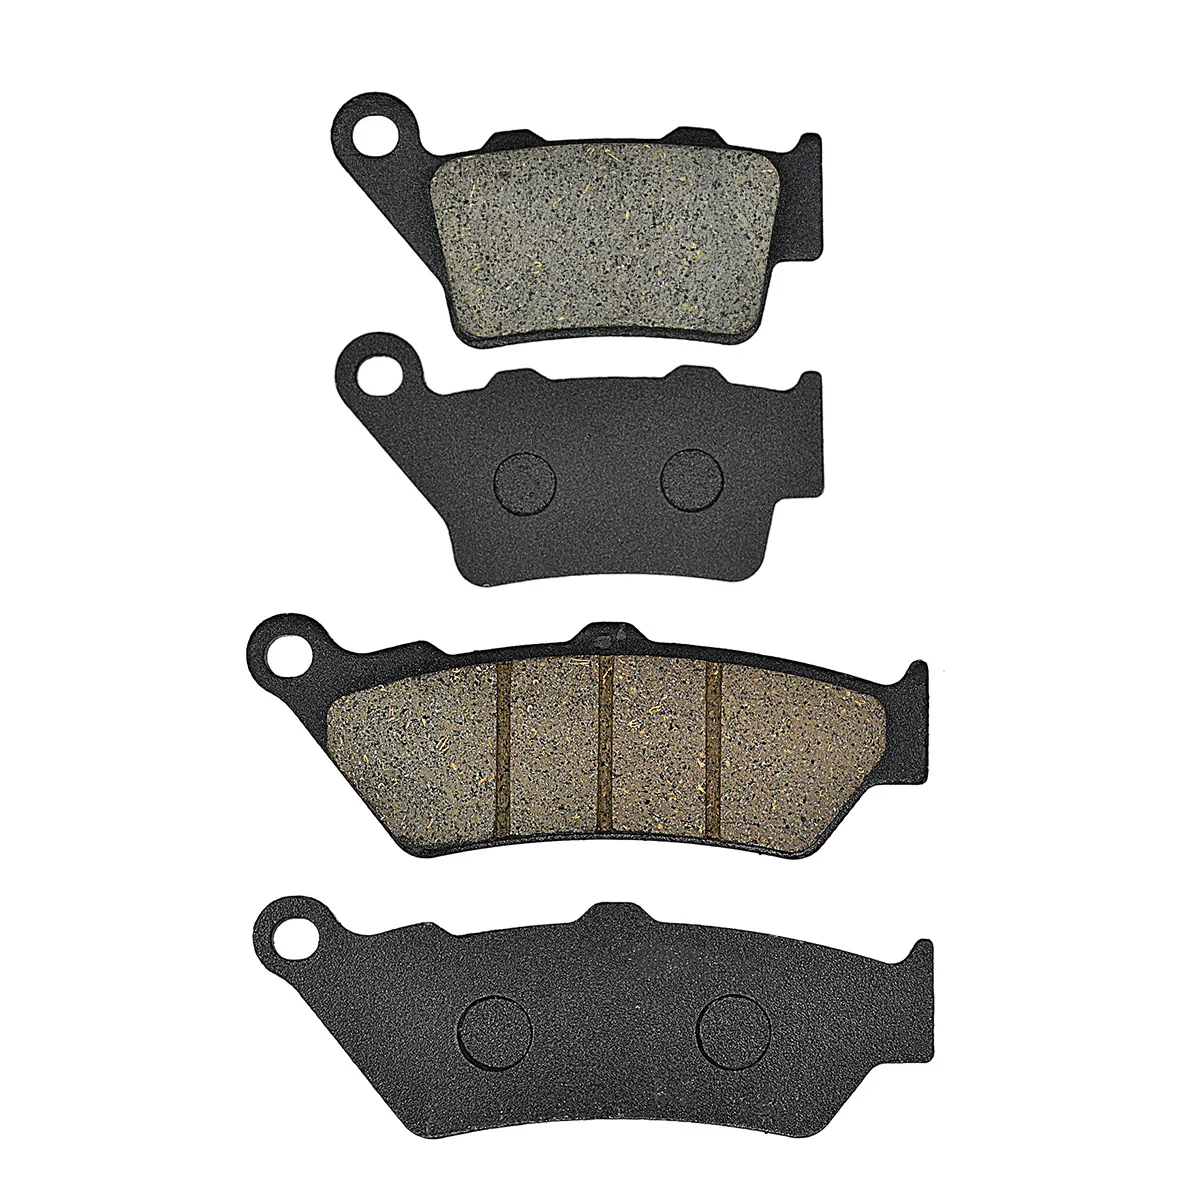 

XCMT Motorcycle Front and Rear Brake Pads For BMW F 650 GS F650 GS F 650GS F650GS F650ST F650CS F650 ST 1993-2007 2008 2009 2012